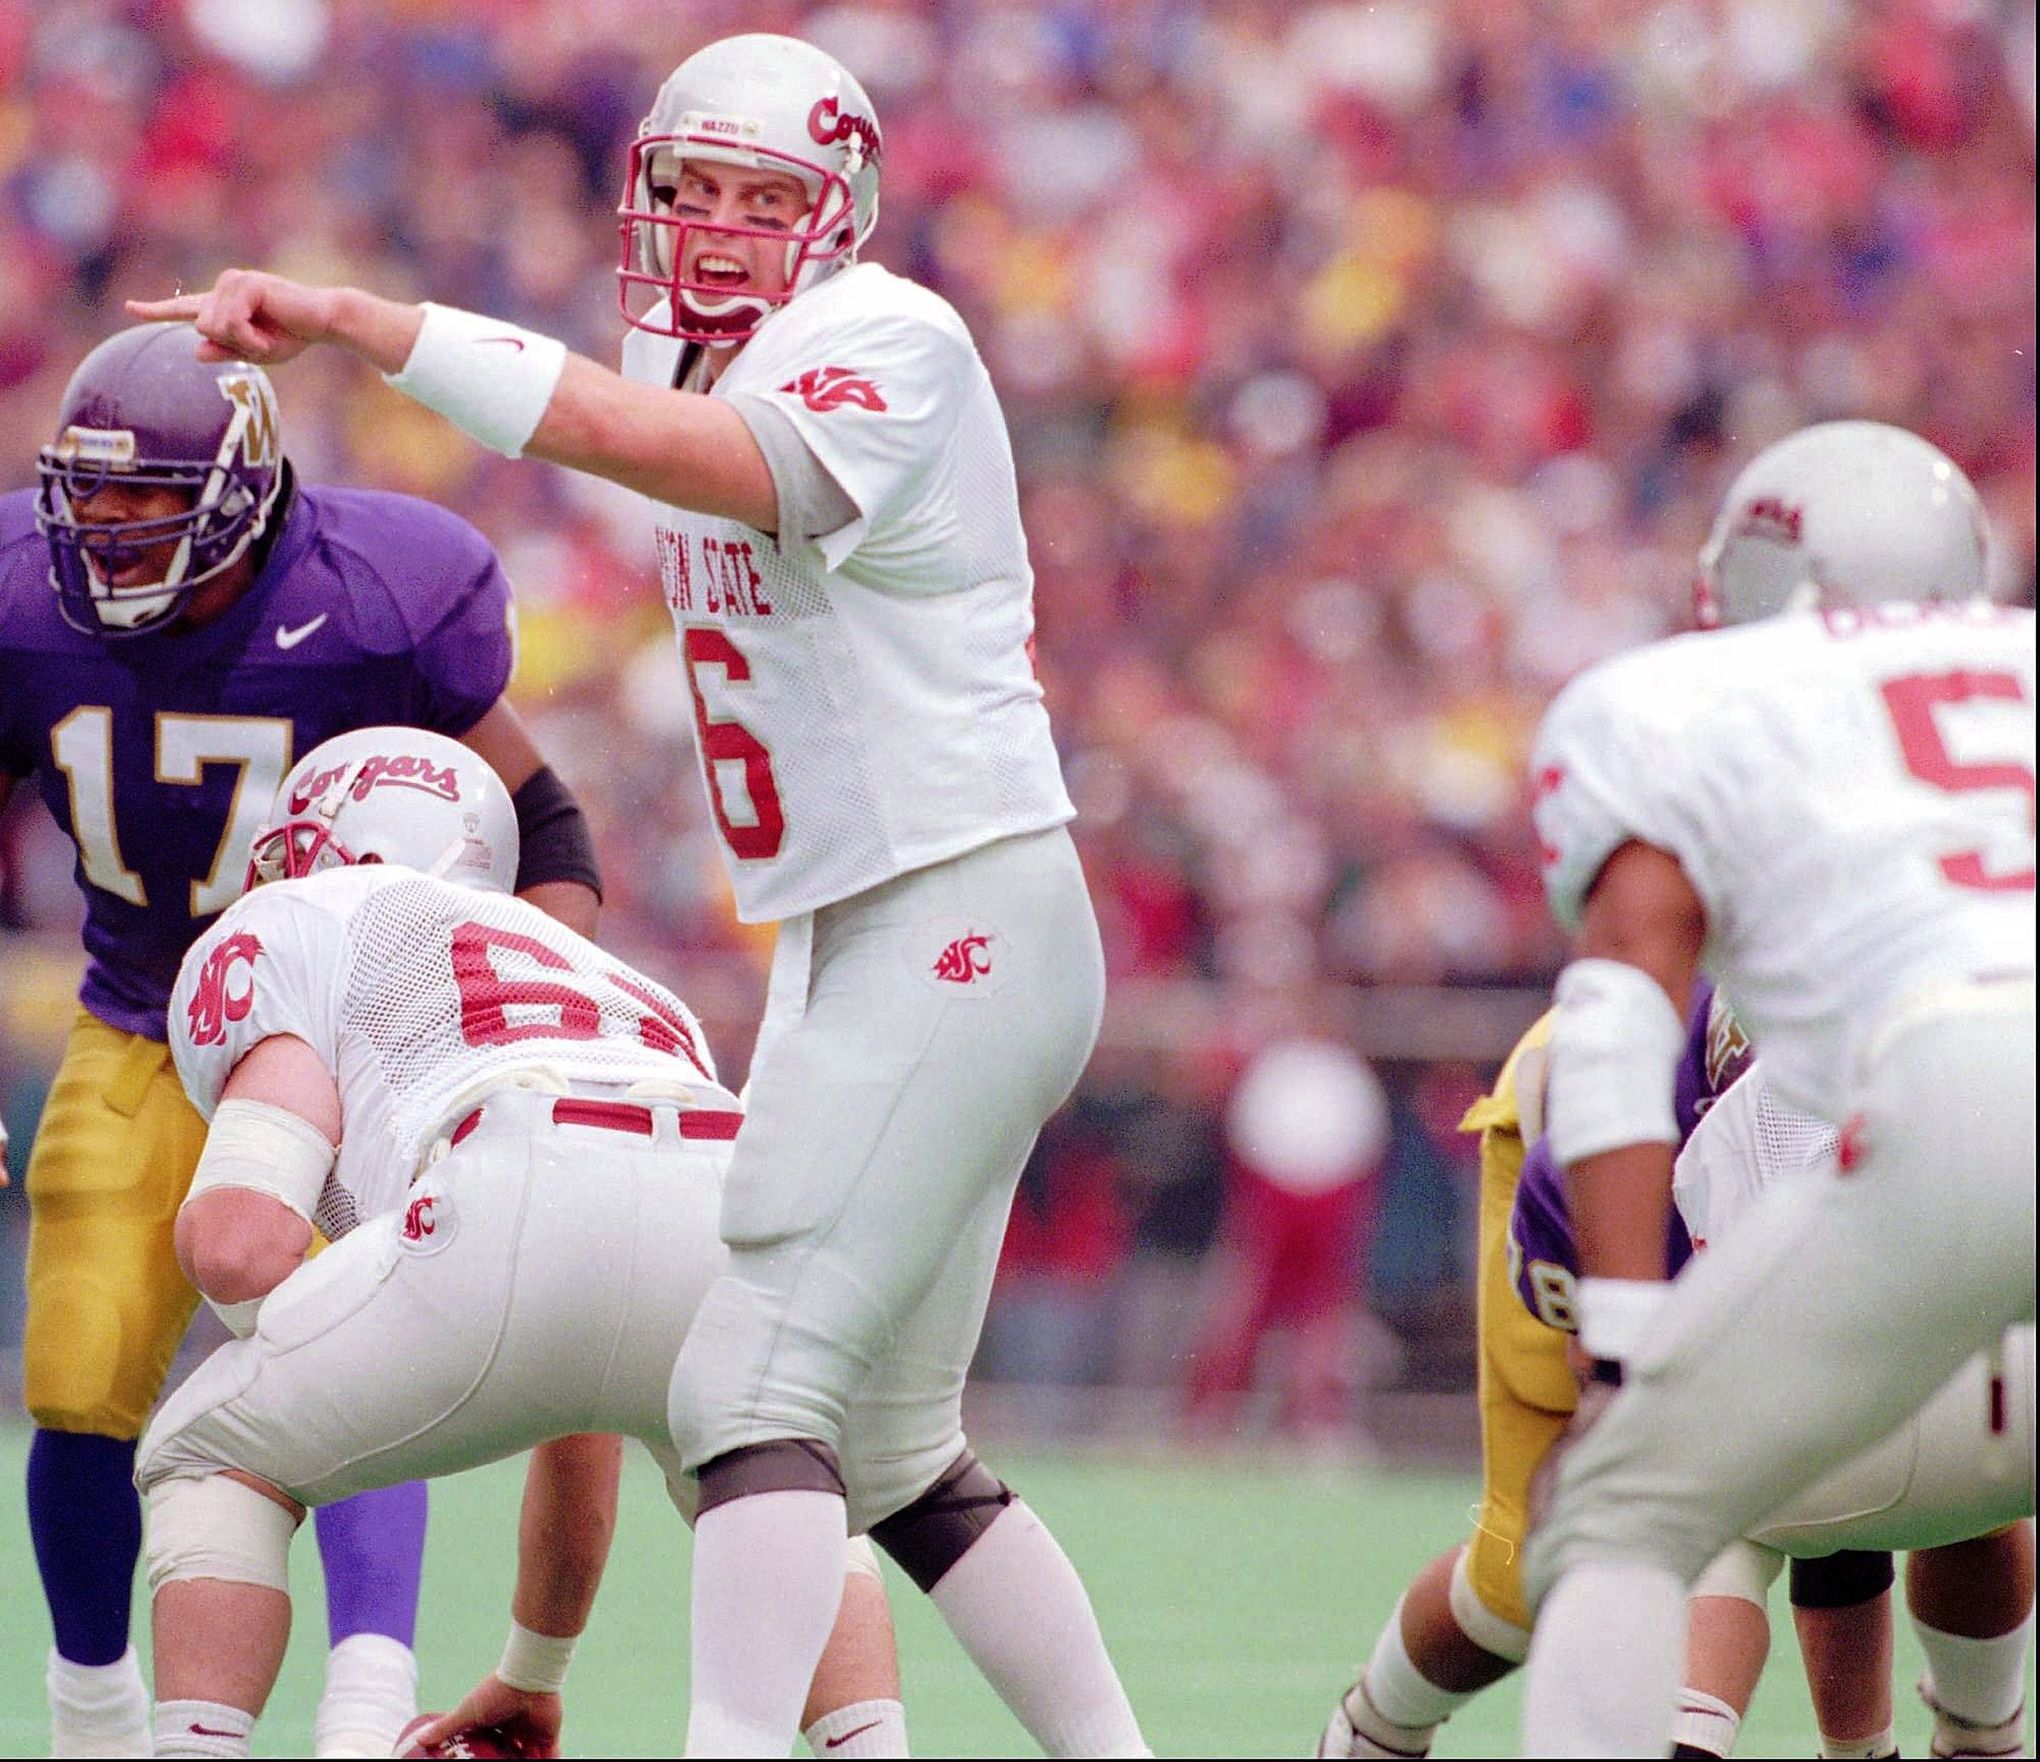 WSU's Ryan Leaf named to College Football Hall of Fame ballot